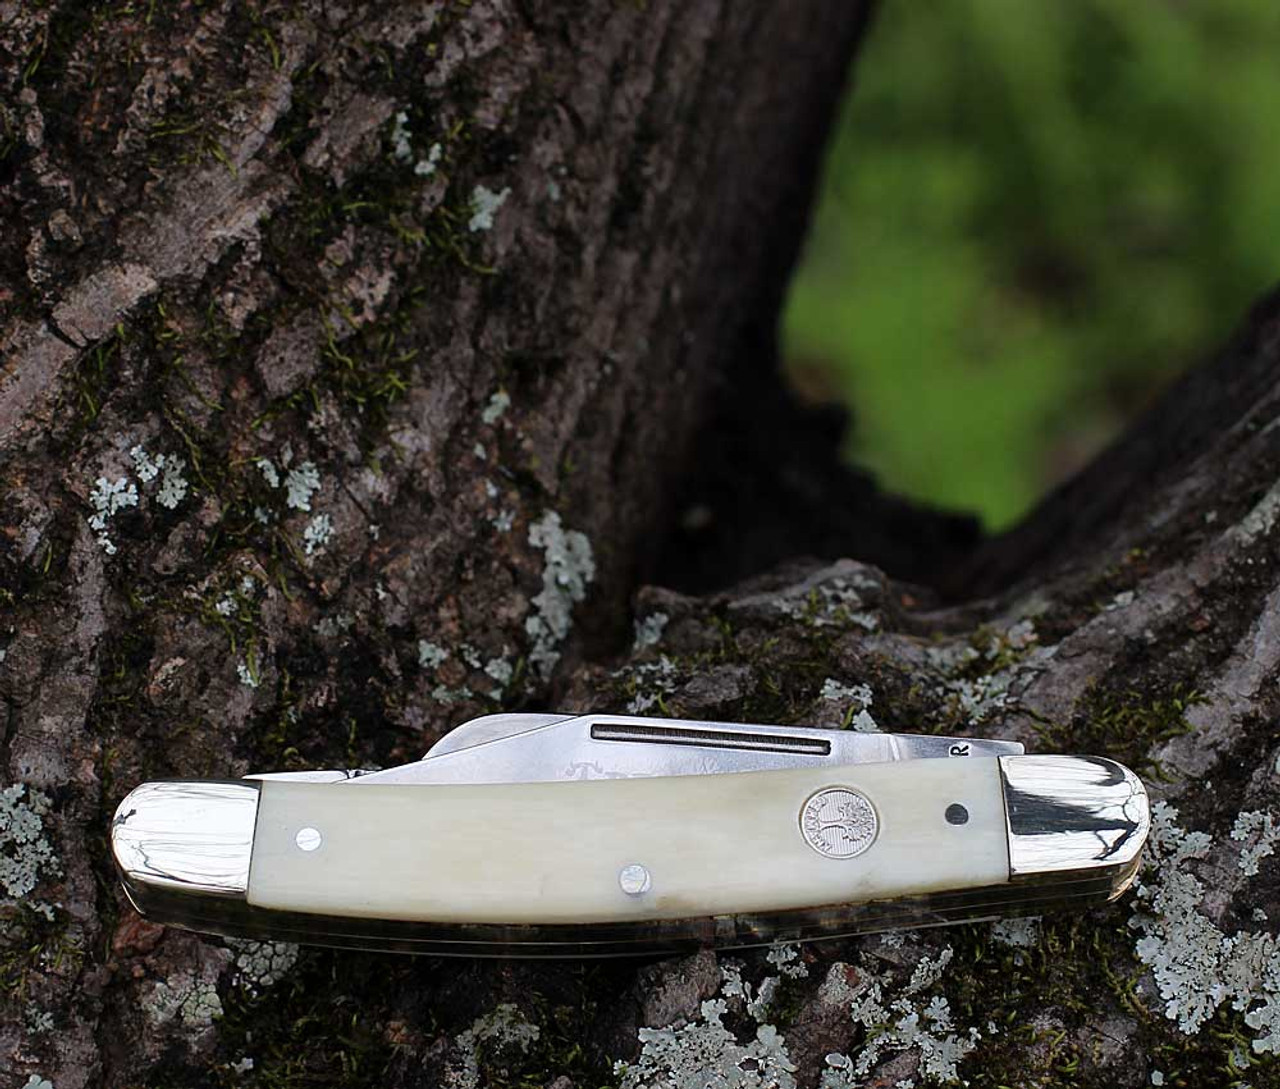 Boker Traditional Series Medium Stockman (BO110854) Mirror Polished D2 Clip, Sheepsfoot, and Pen Blades, White Smooth Bone Handle with Nickel Silver Bolsters